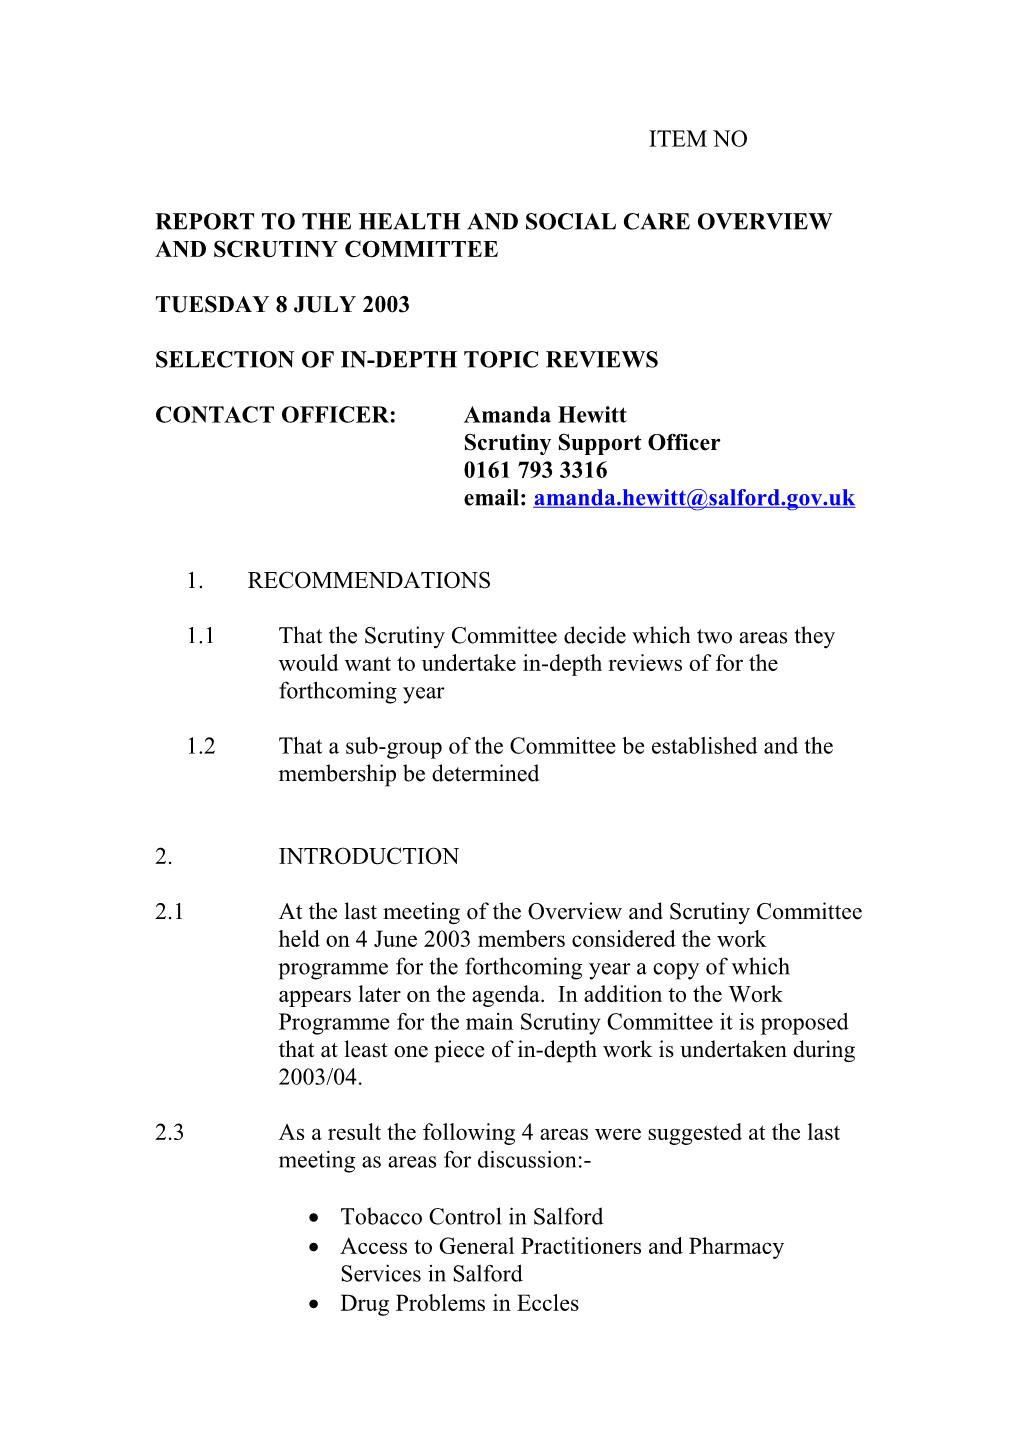 Report to the Health and Social Care Overview and Scrutiny Committee